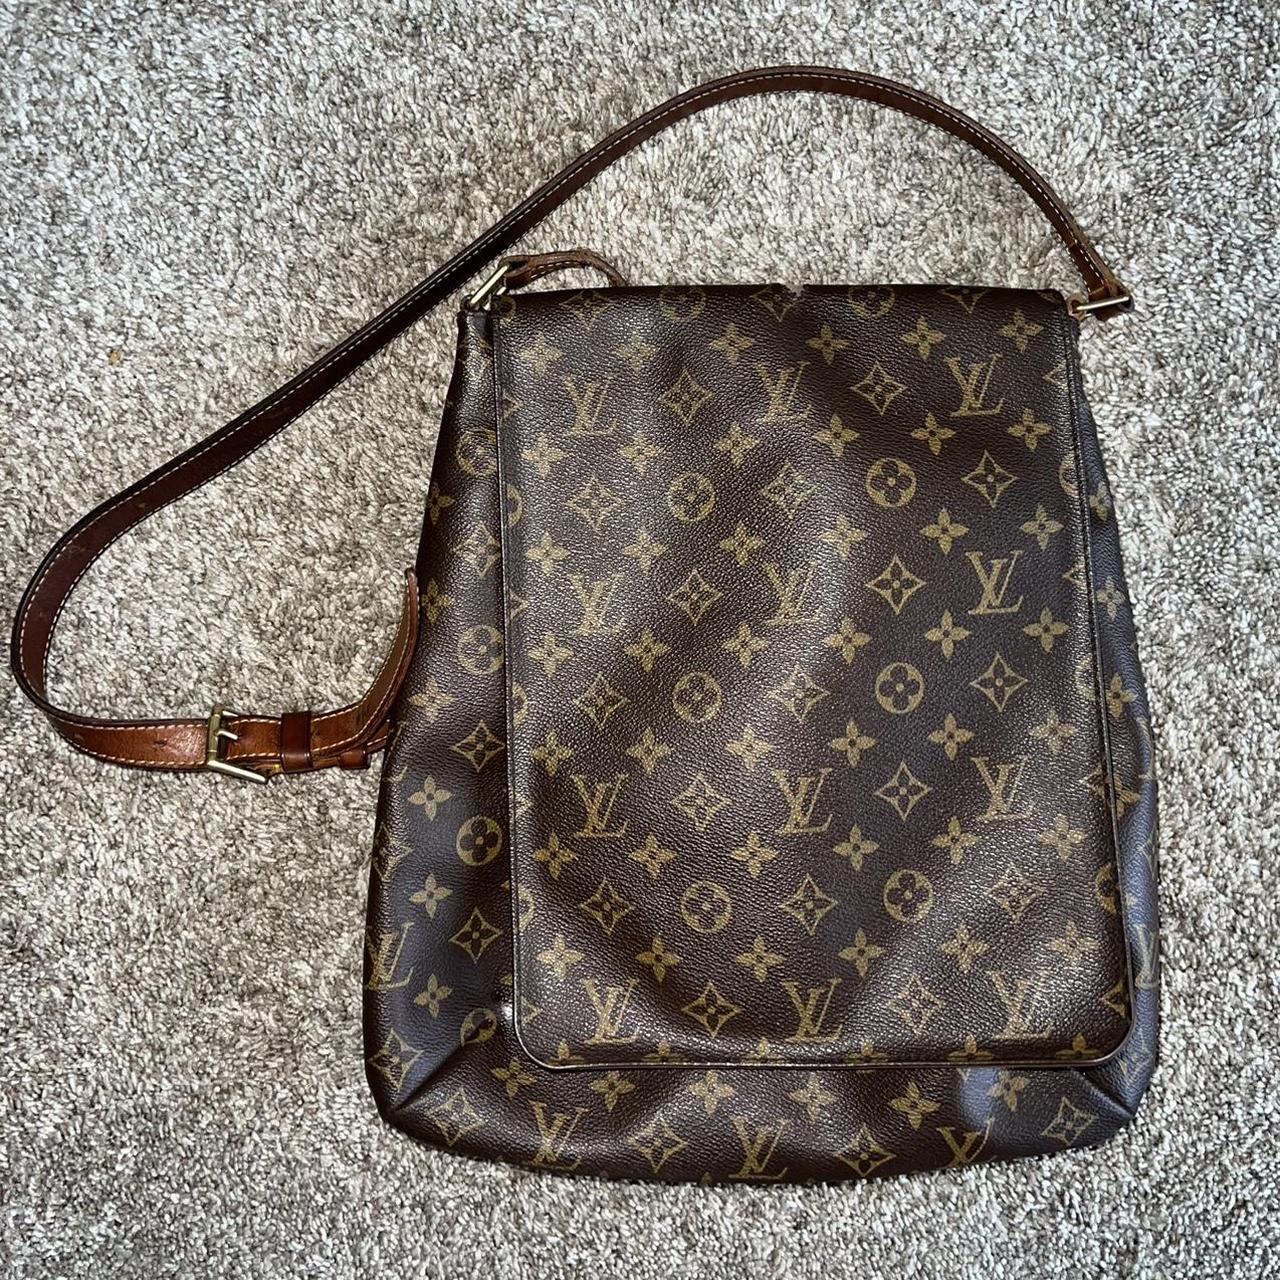 White lv bag - comes with a small round bag that is - Depop